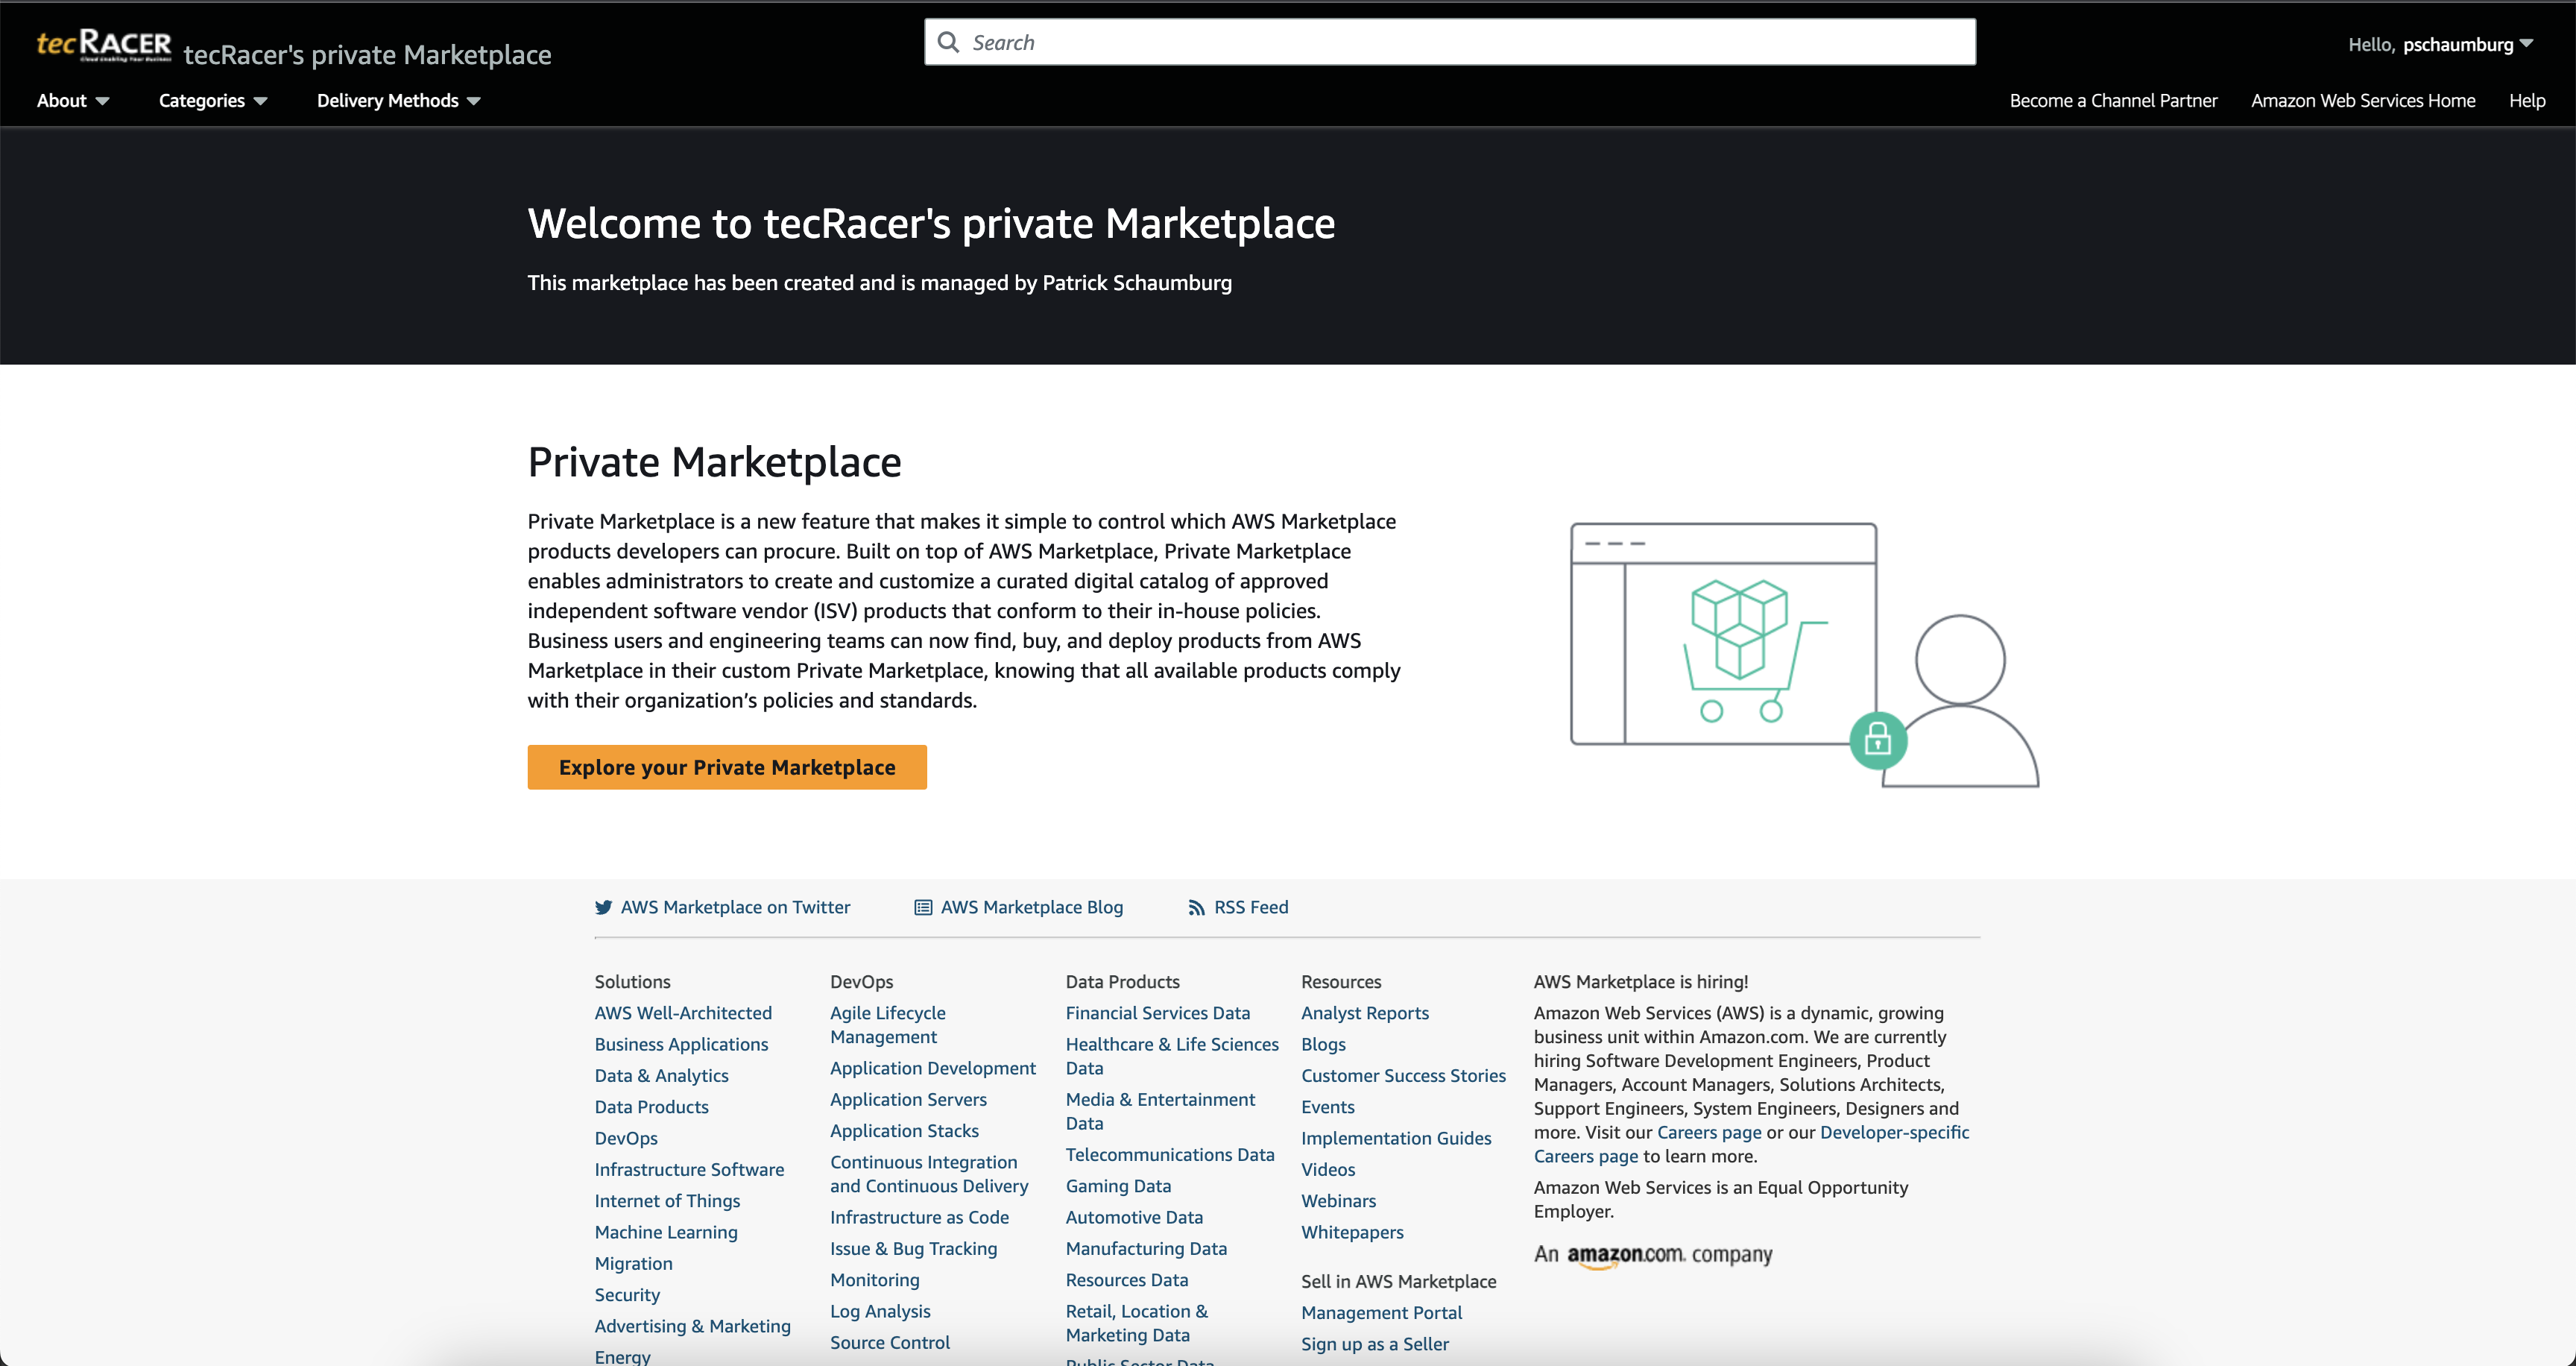 Private Marketplace Overview